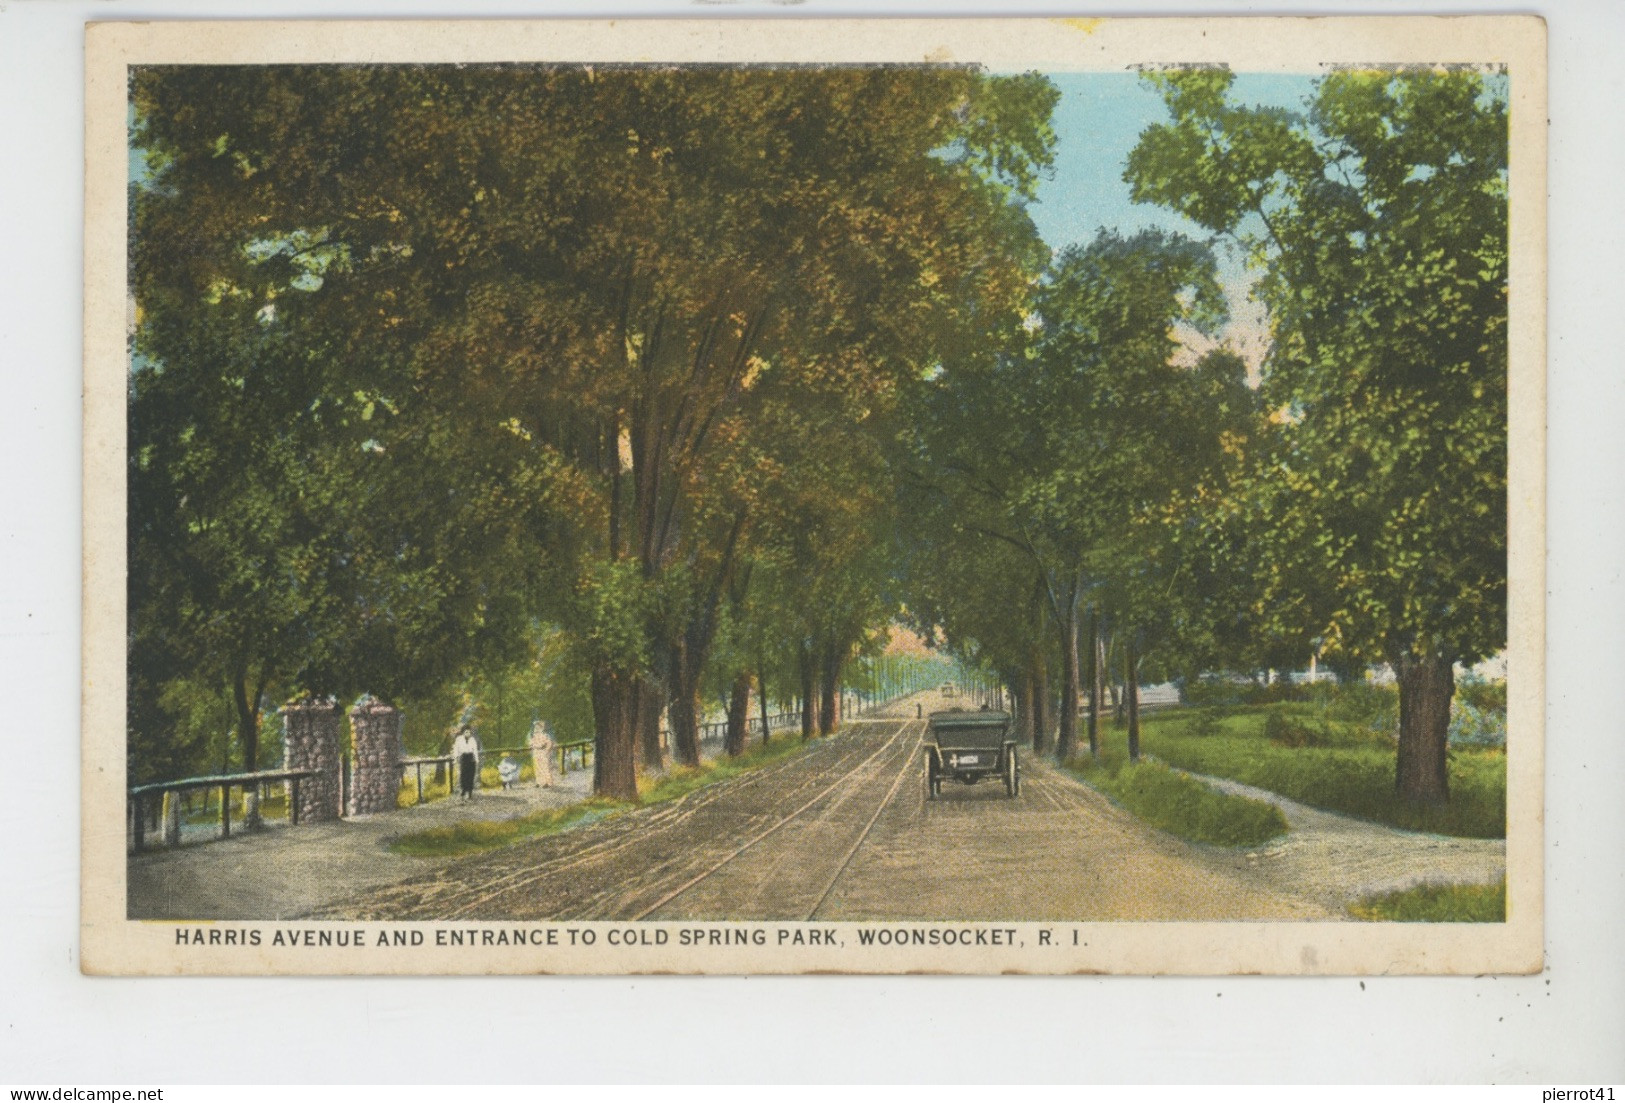 U.S.A. - RHODE ISLAND - WOONSOCKET - Harris Avenue And Entrance To Cold Spring Park - Woonsocket